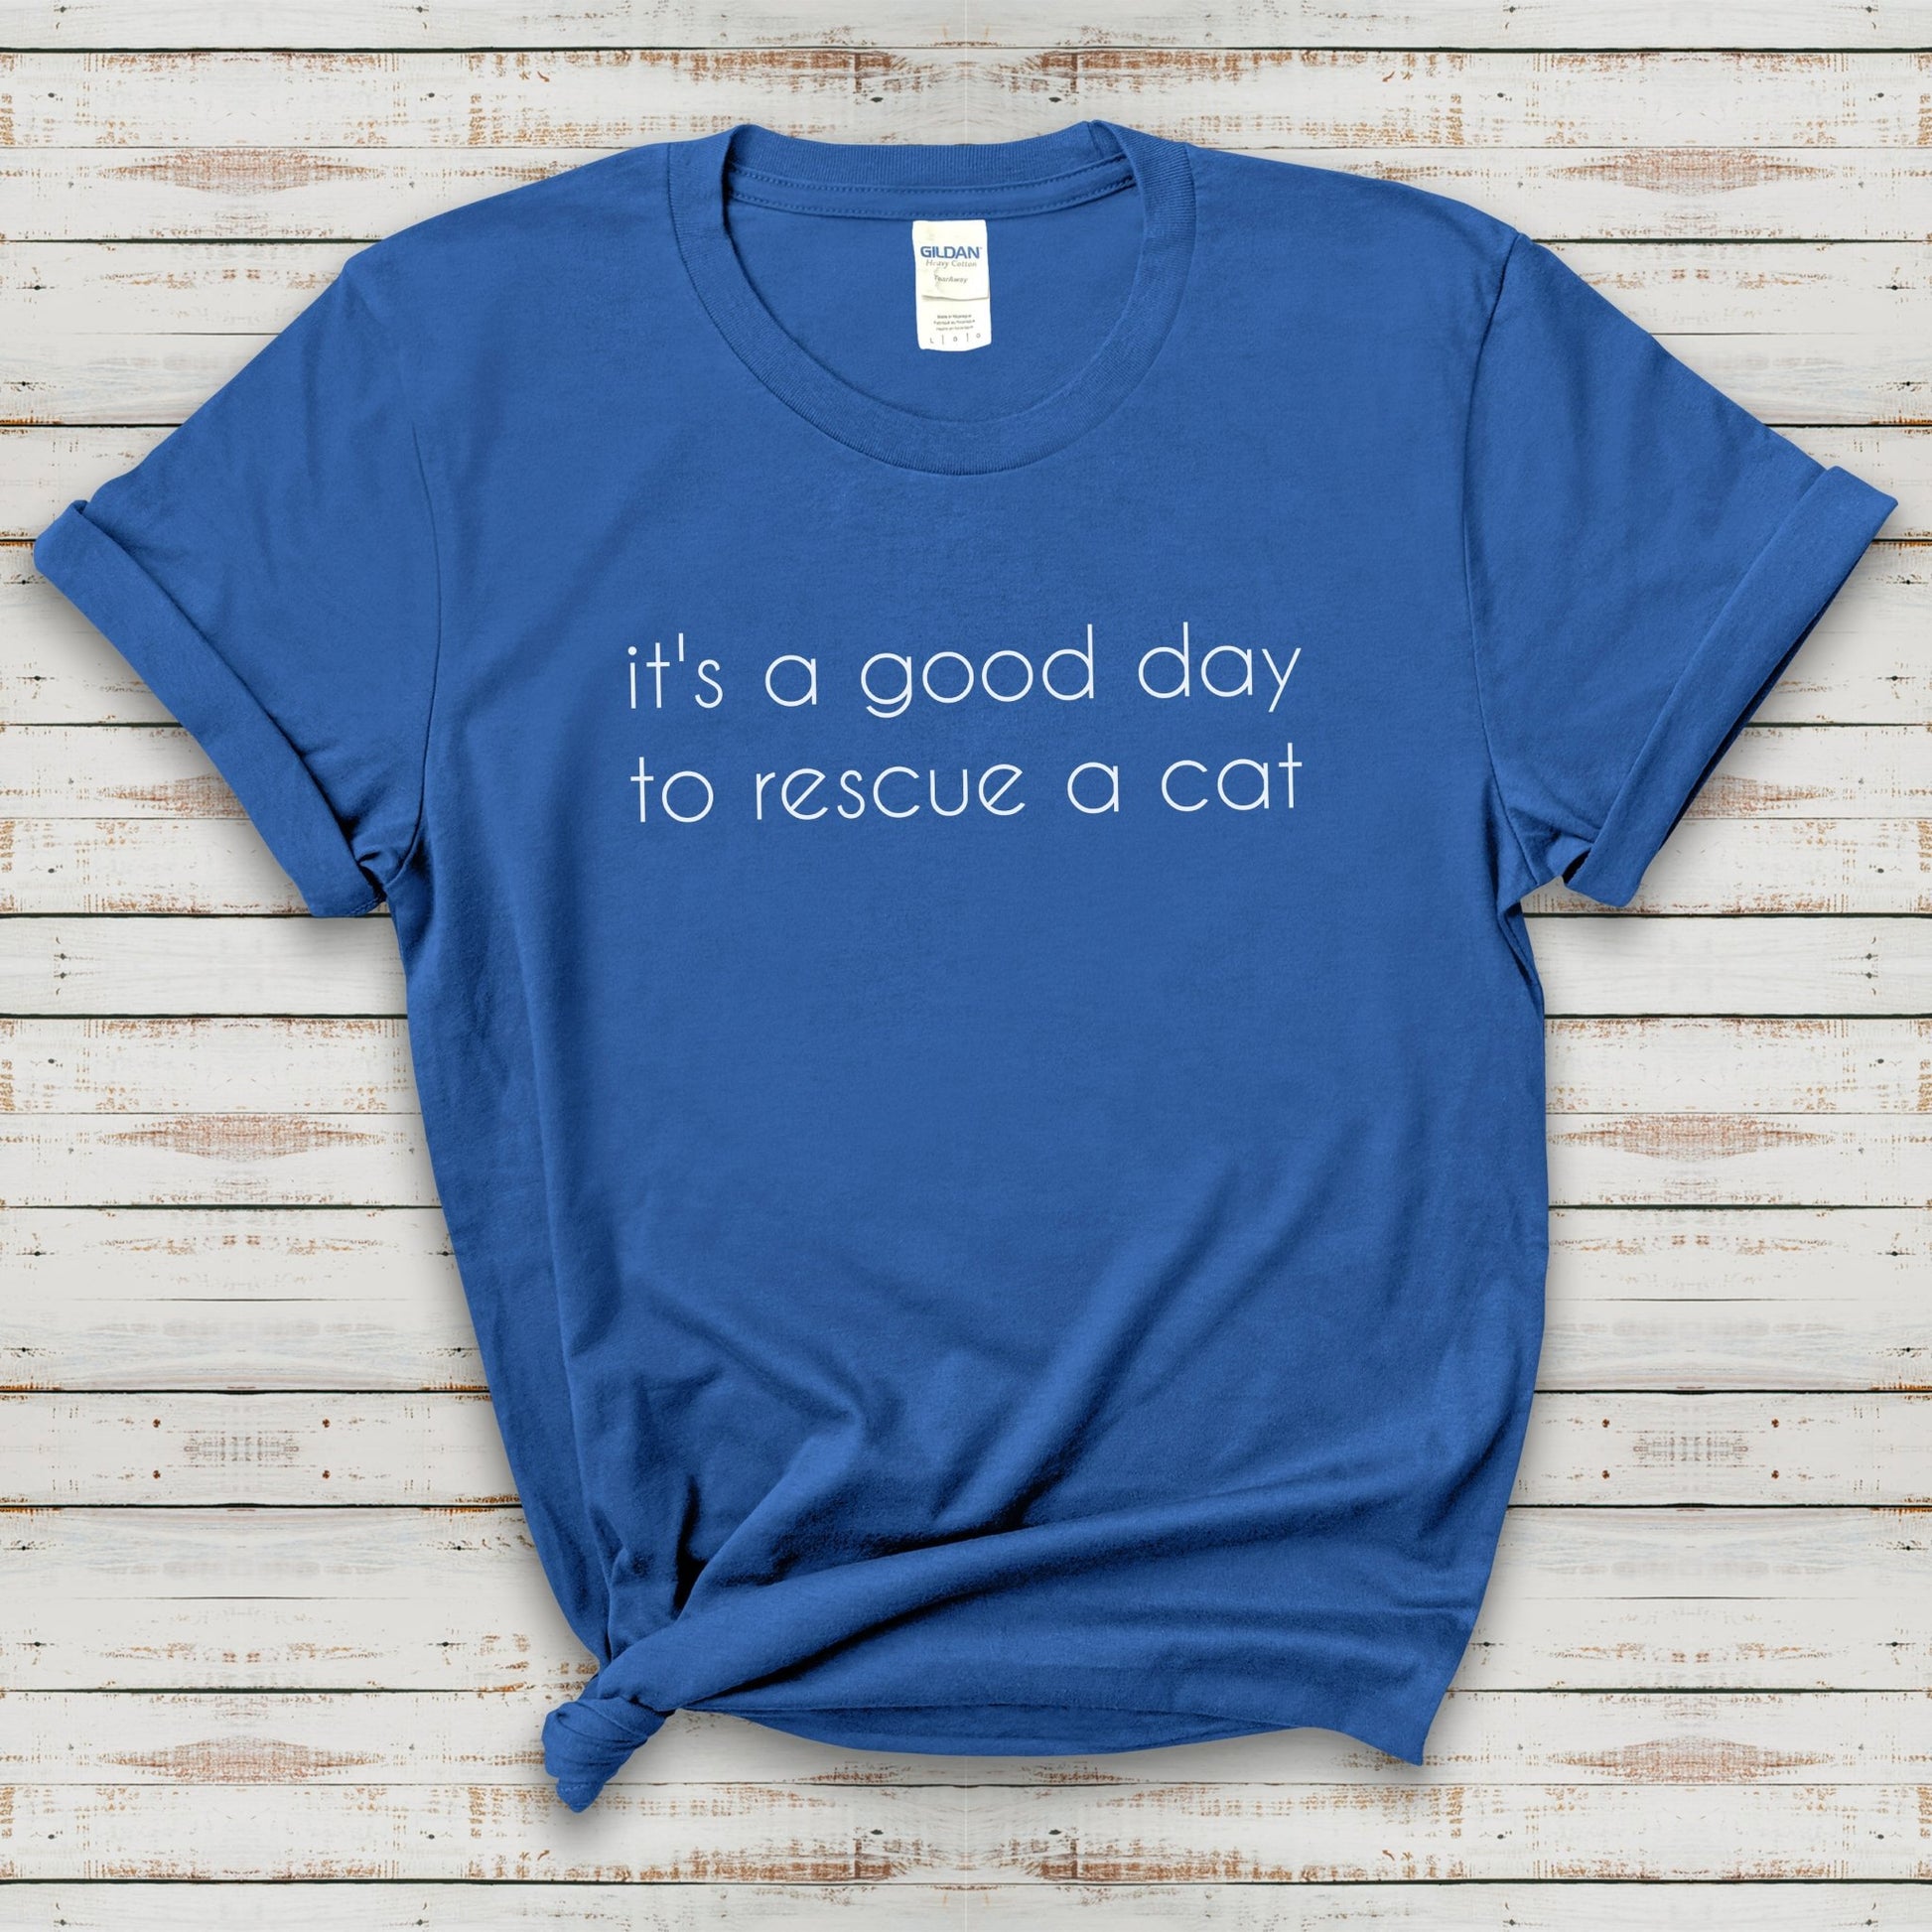 It's A Good Day To Rescue A Cat | Text Tees - Detezi Designs-10195106383728871298